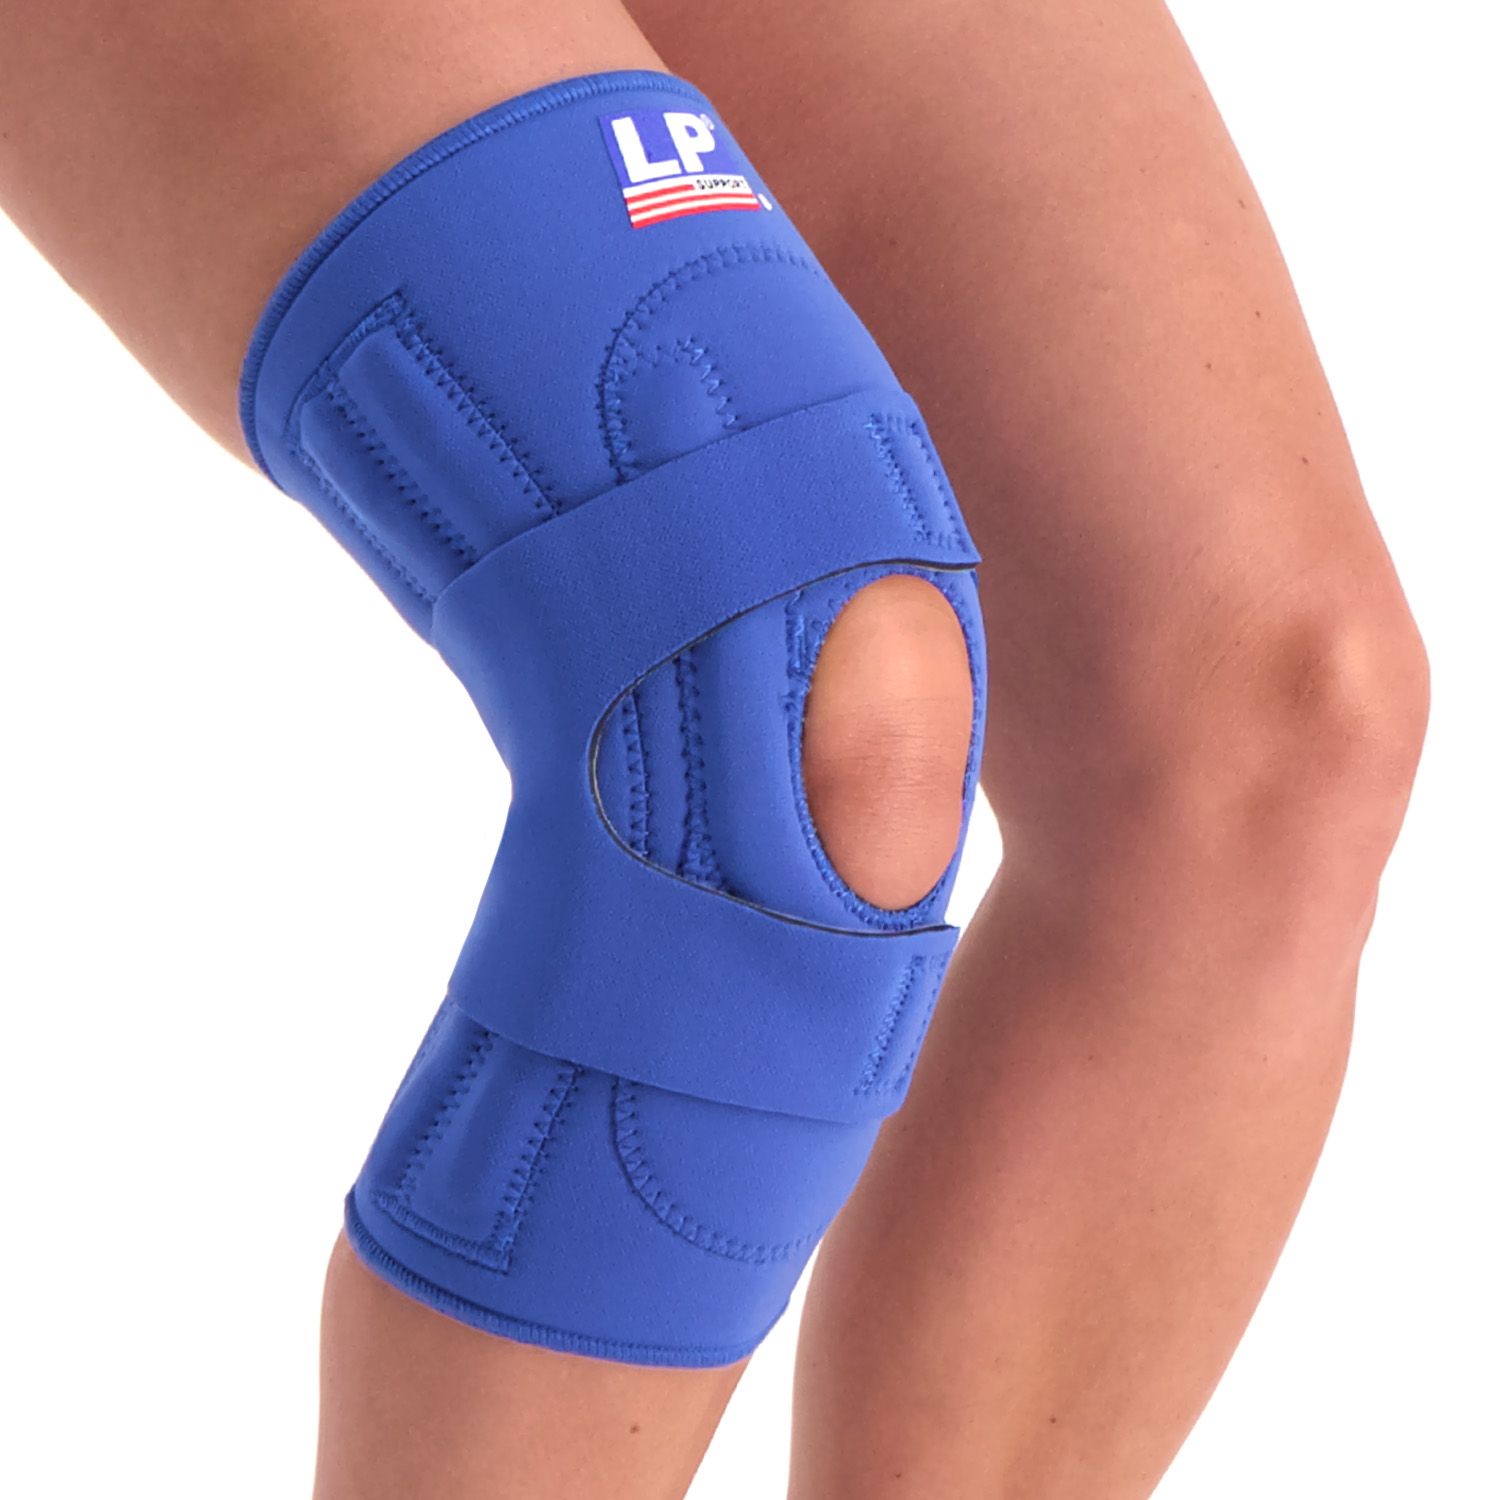 LP Support 721 Knee support blue